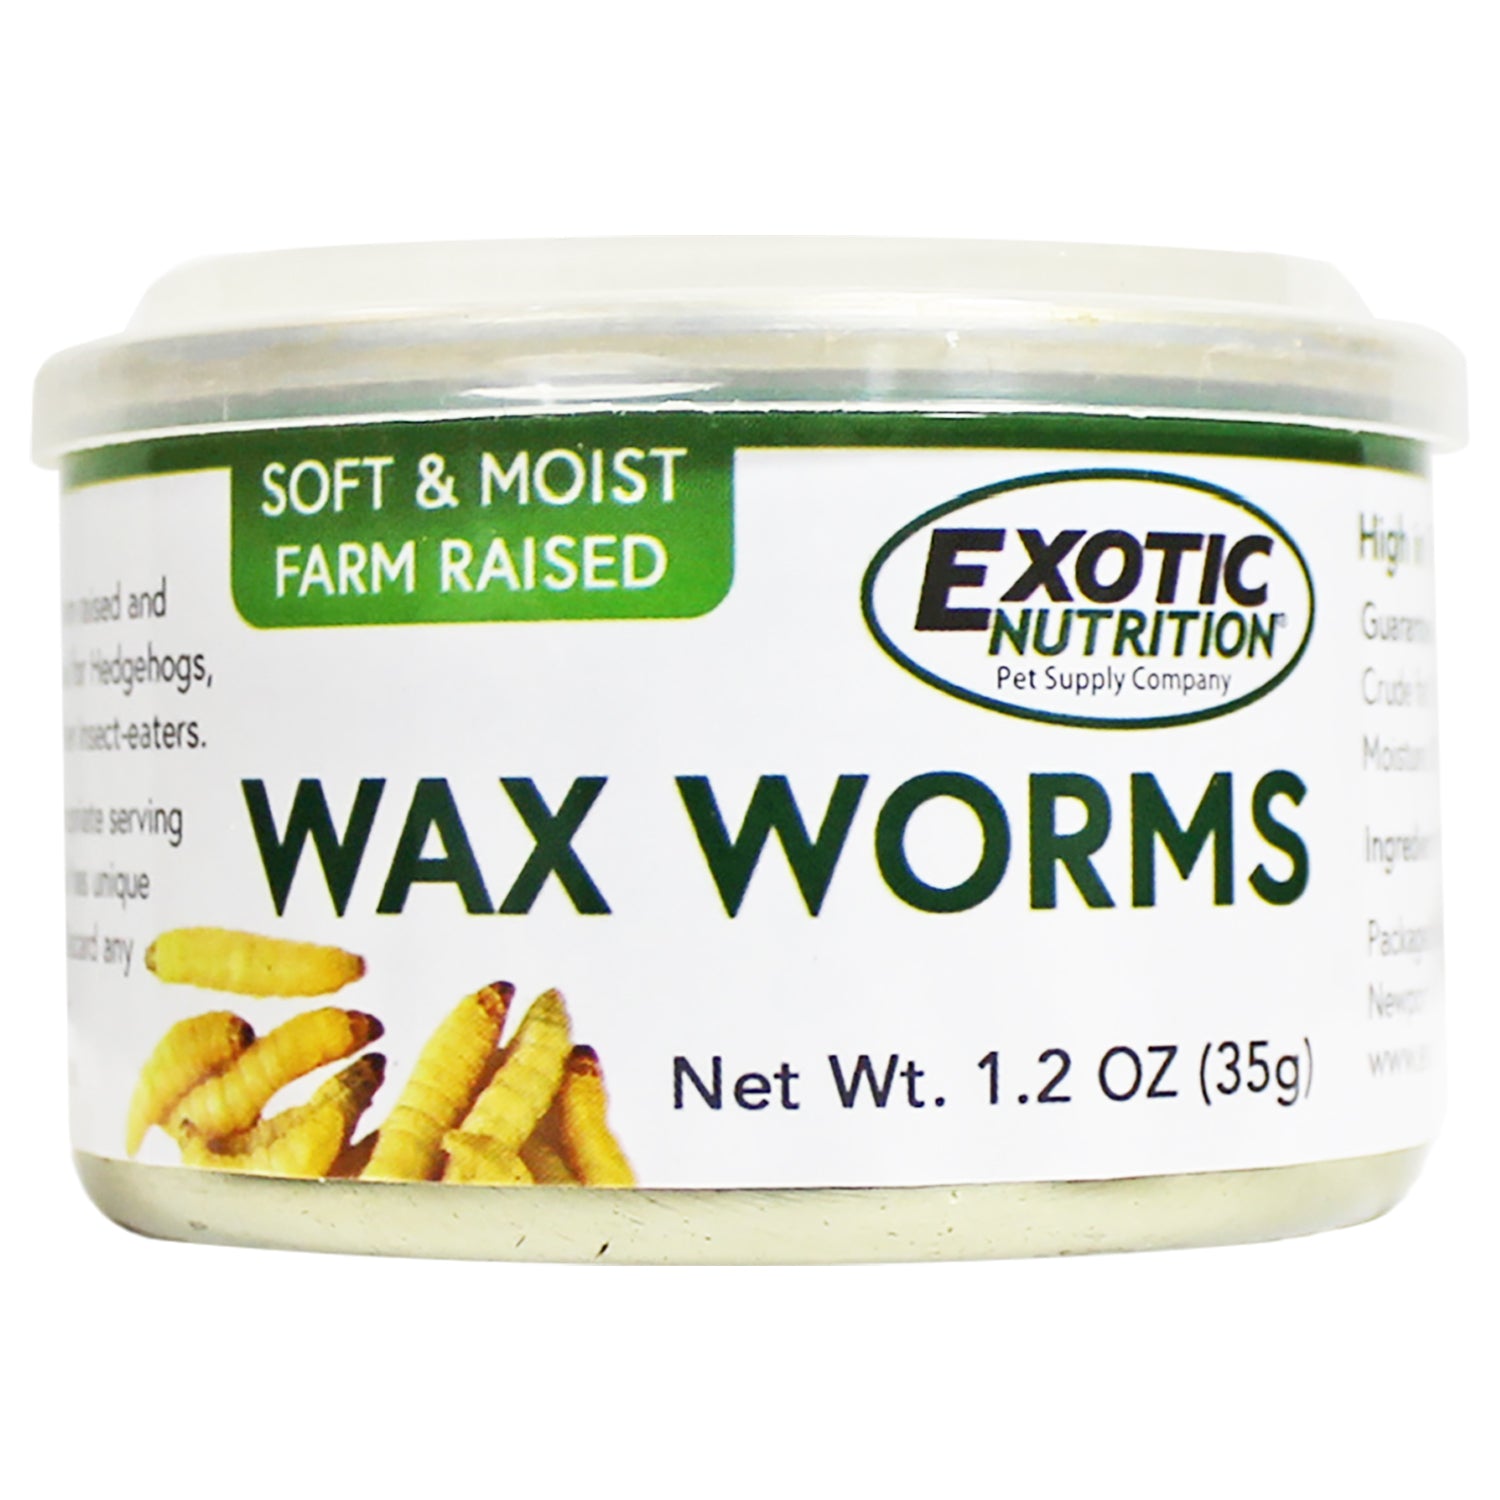 Canned Wax Worms